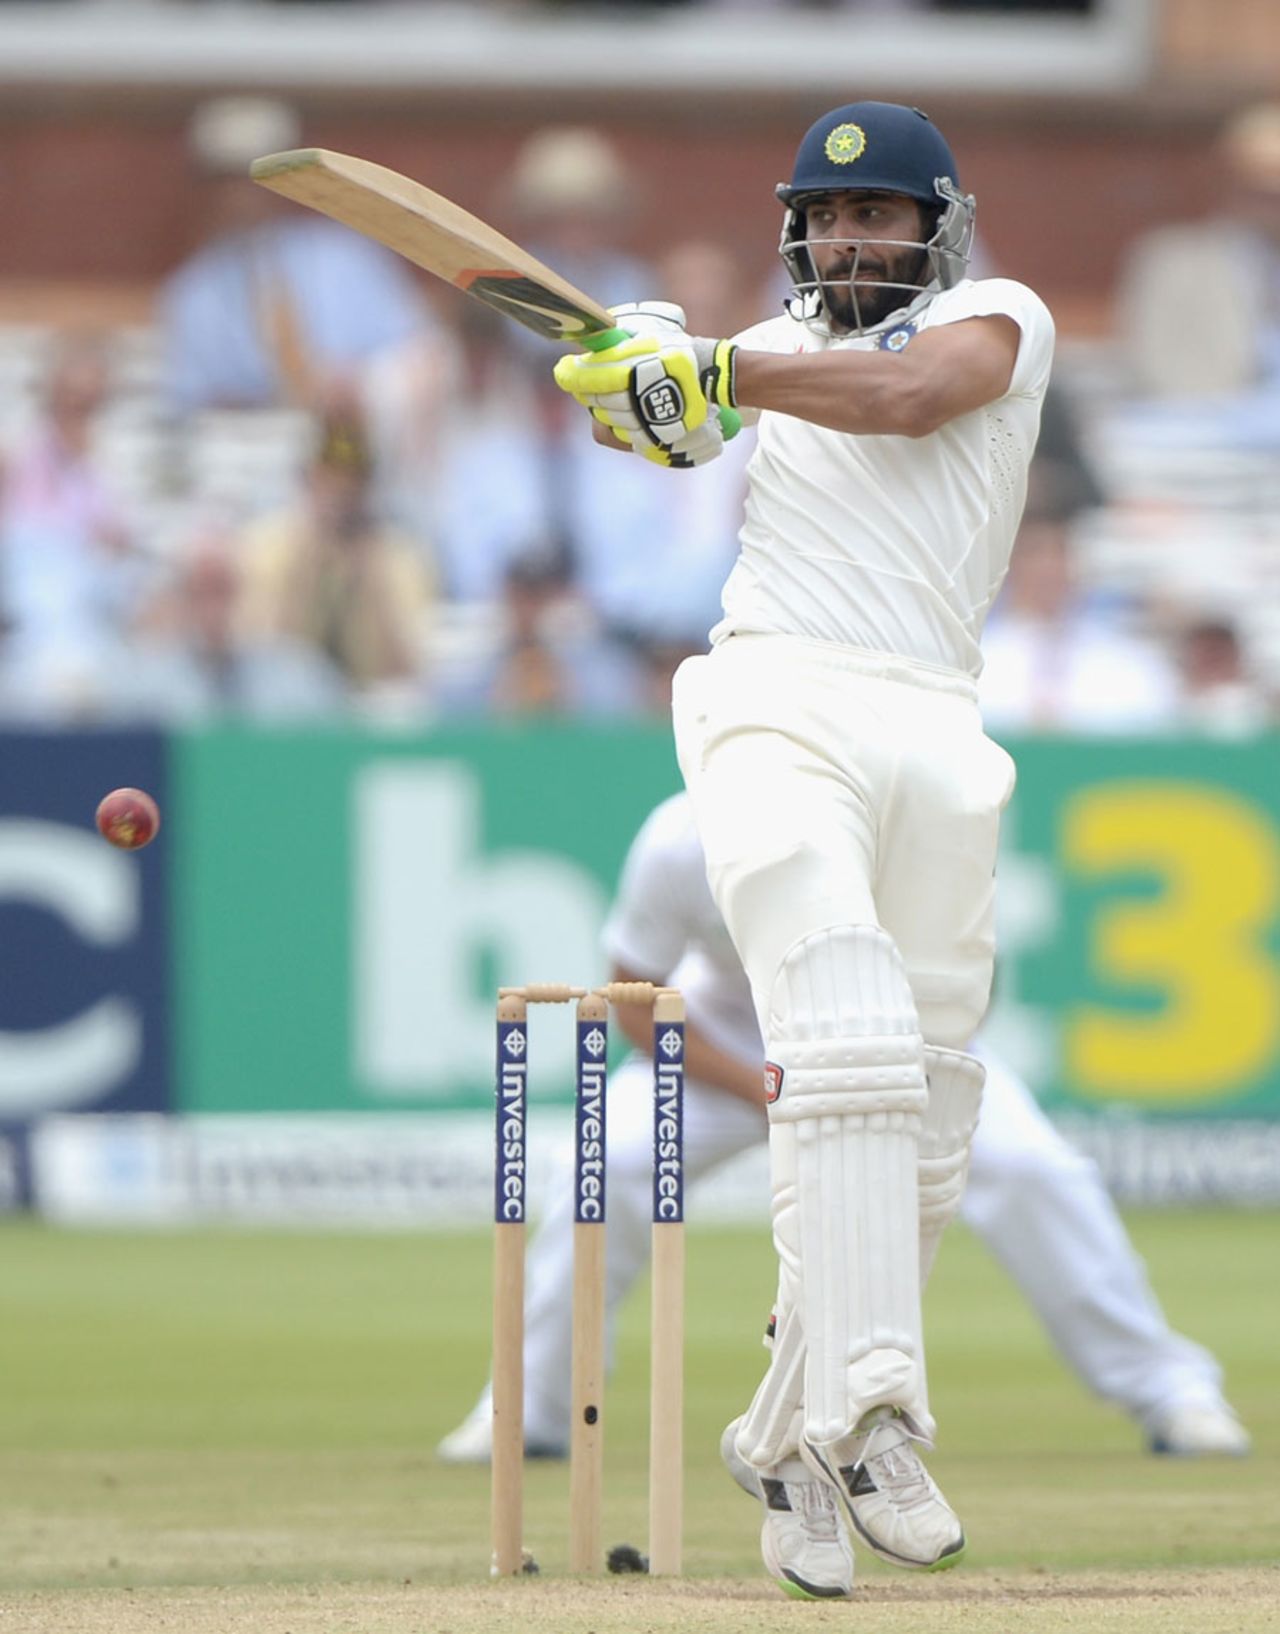 Ravindra Jadeja played an attacking innings, England v India, 2nd Investec Test, Lord's, 4th day, July 20, 2014